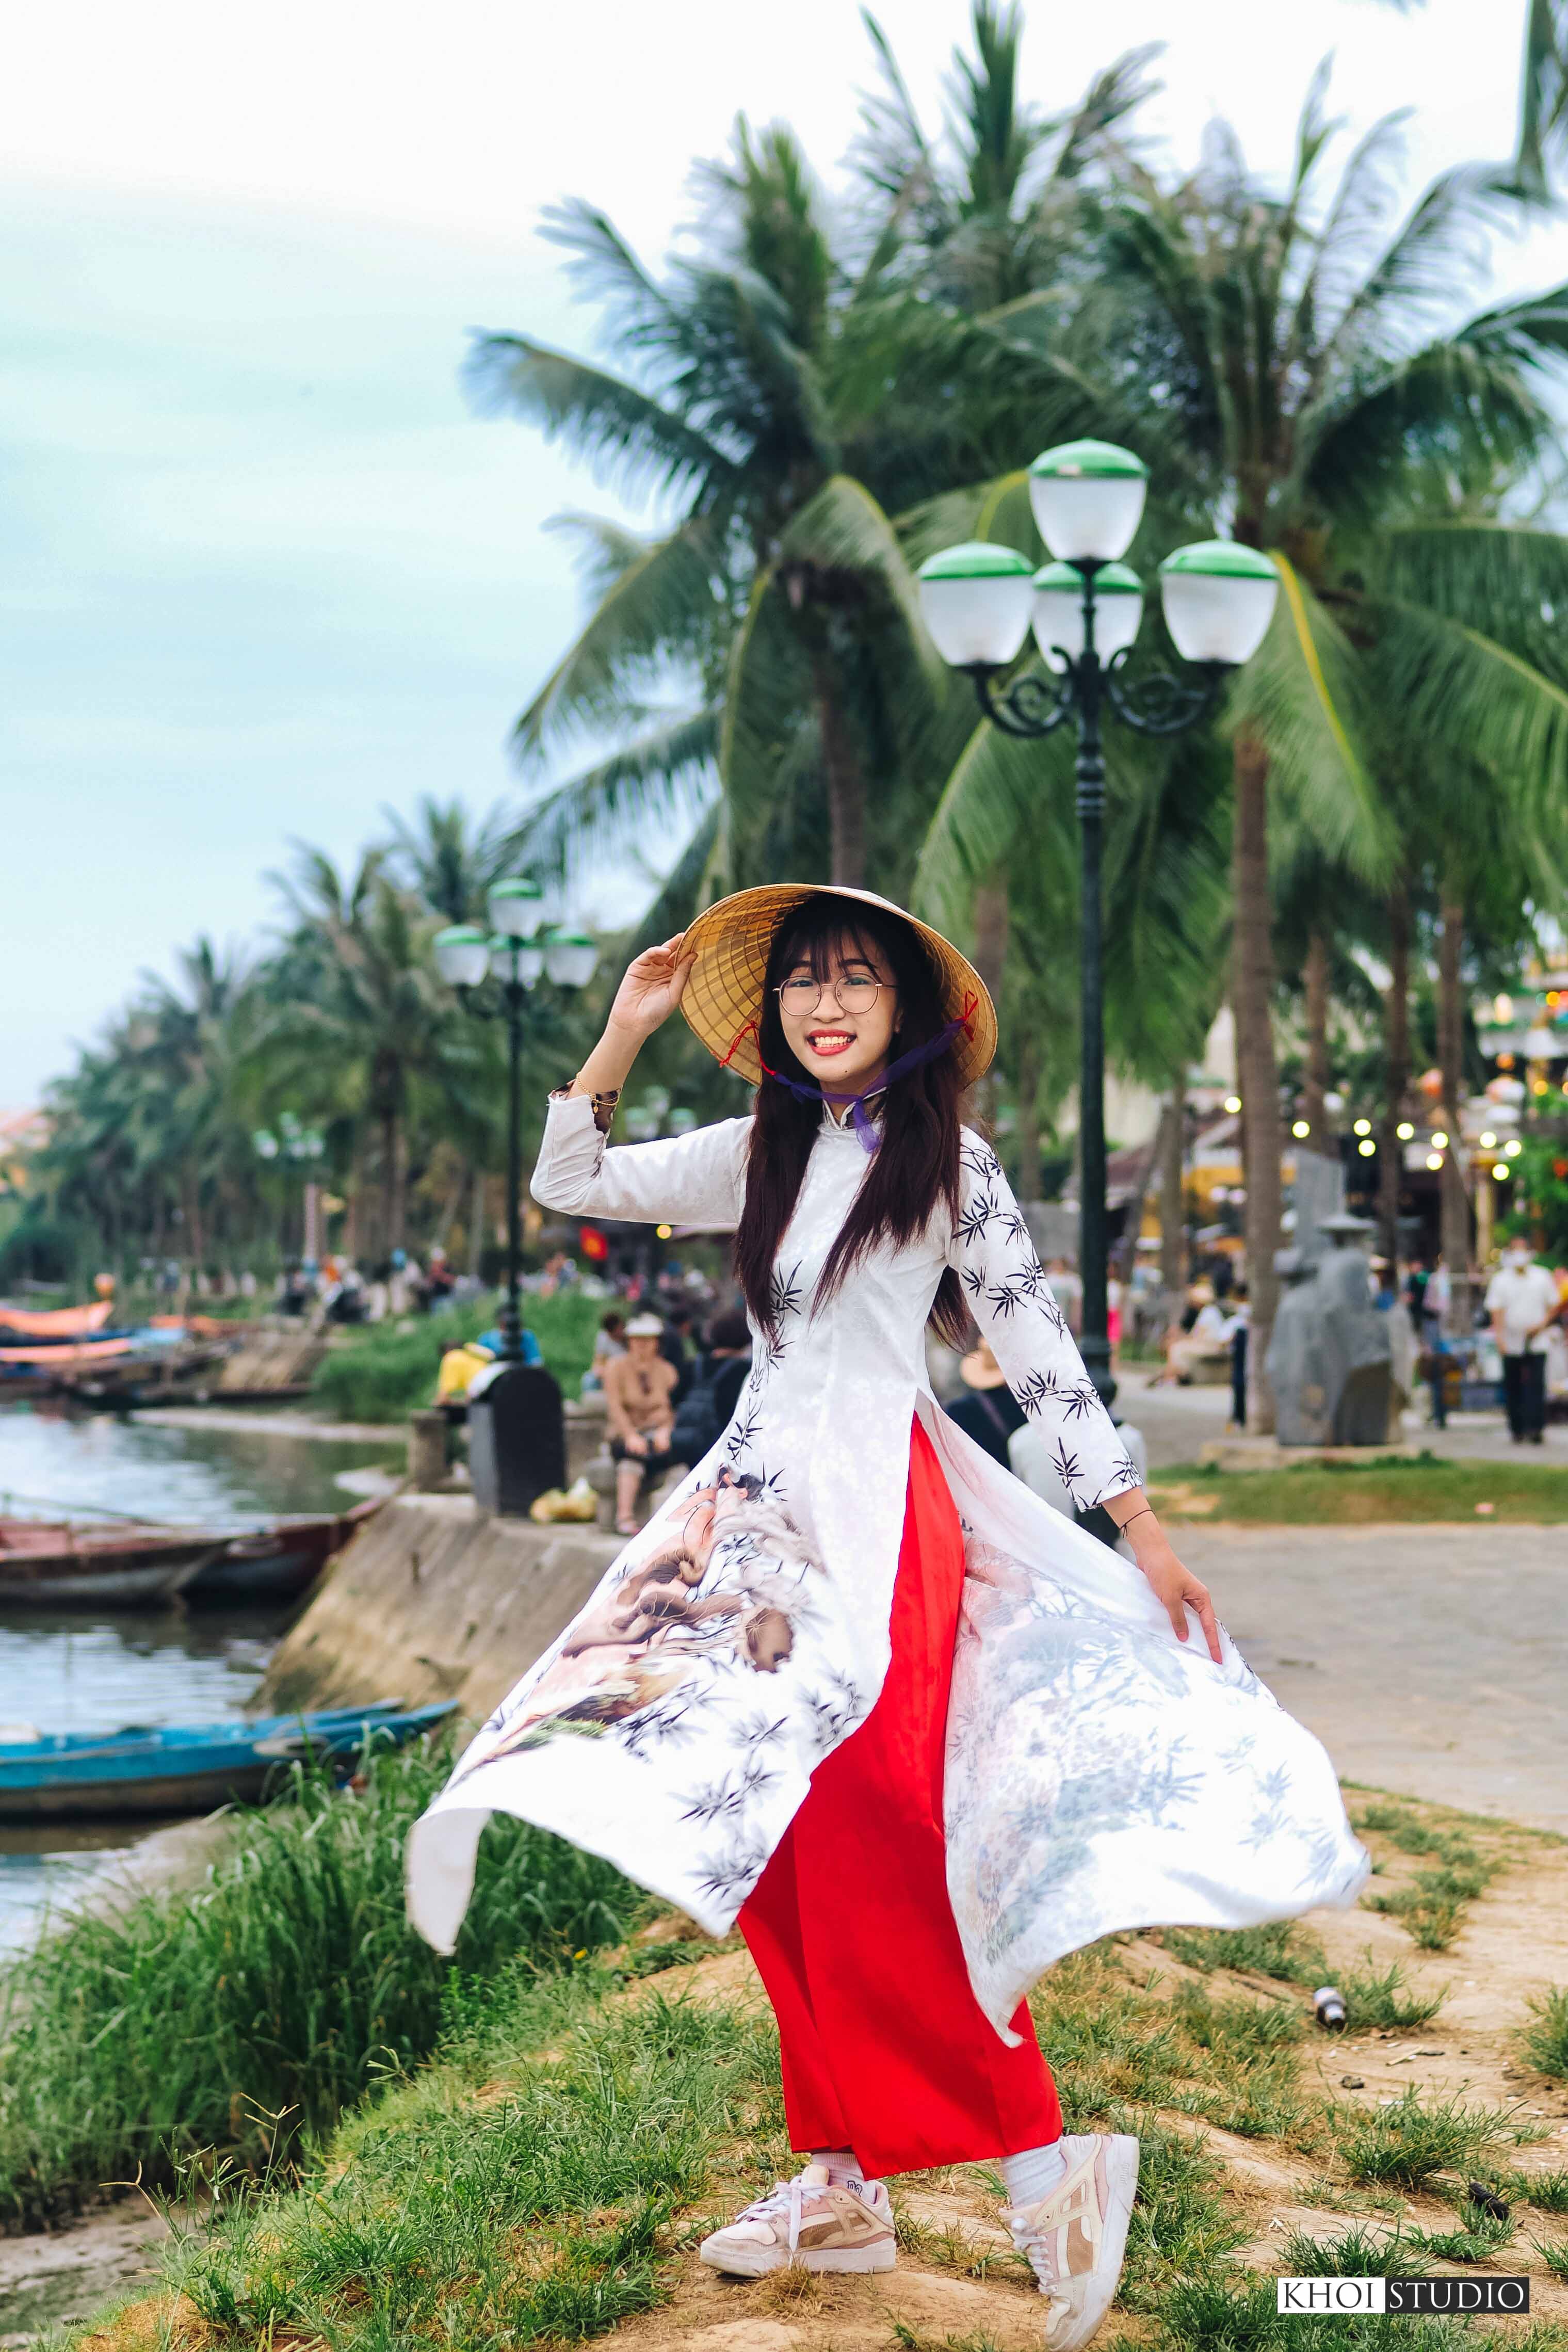 Find a family photographer in Hoi An ancient town: Family photo session with Ao Dai on Hoai River